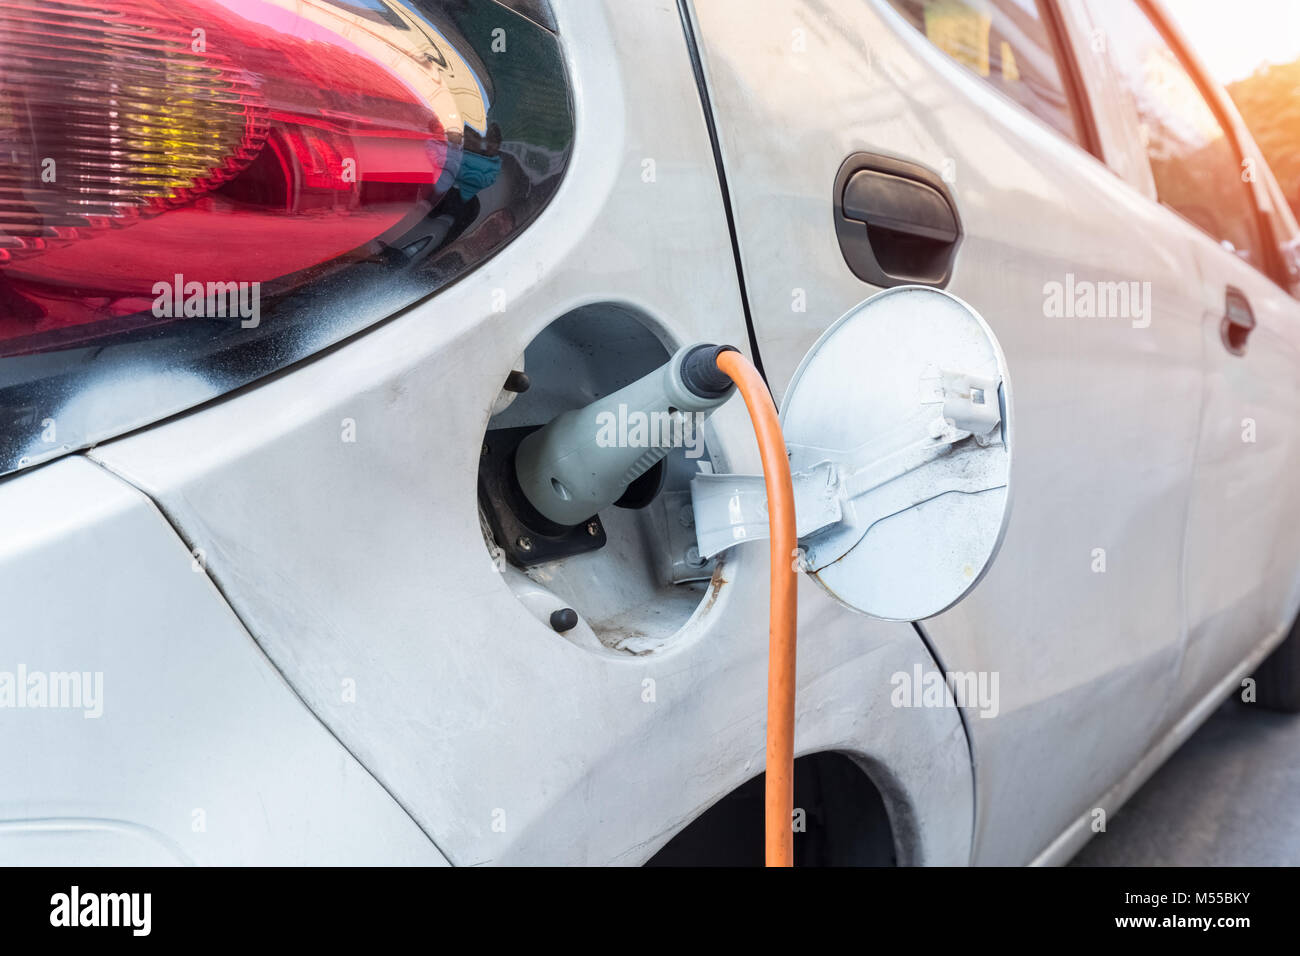 electric car charging Stock Photo